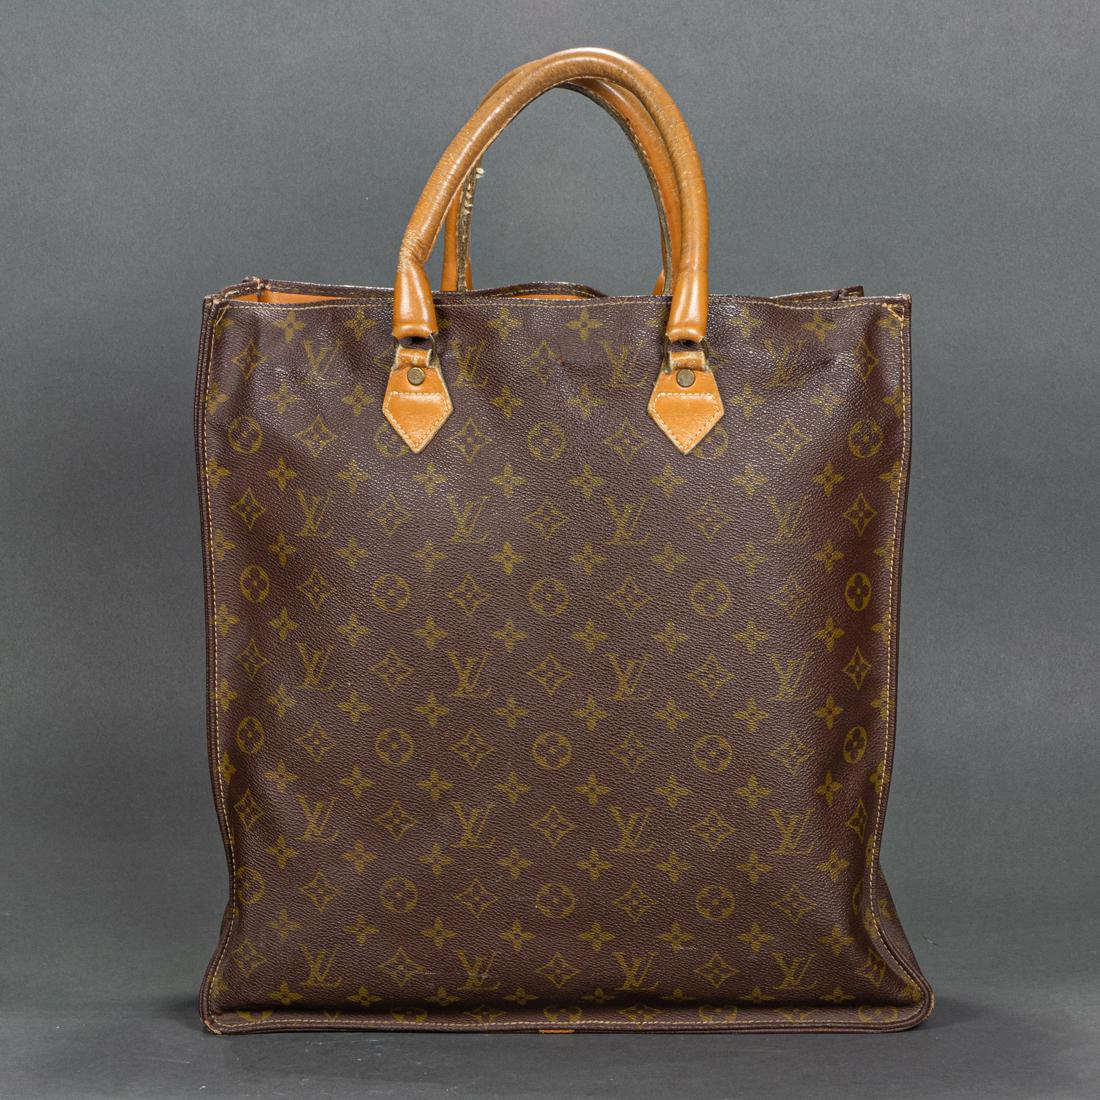 Vintage Louis Vuitton monogram canvas Sac Plat tote with rolled